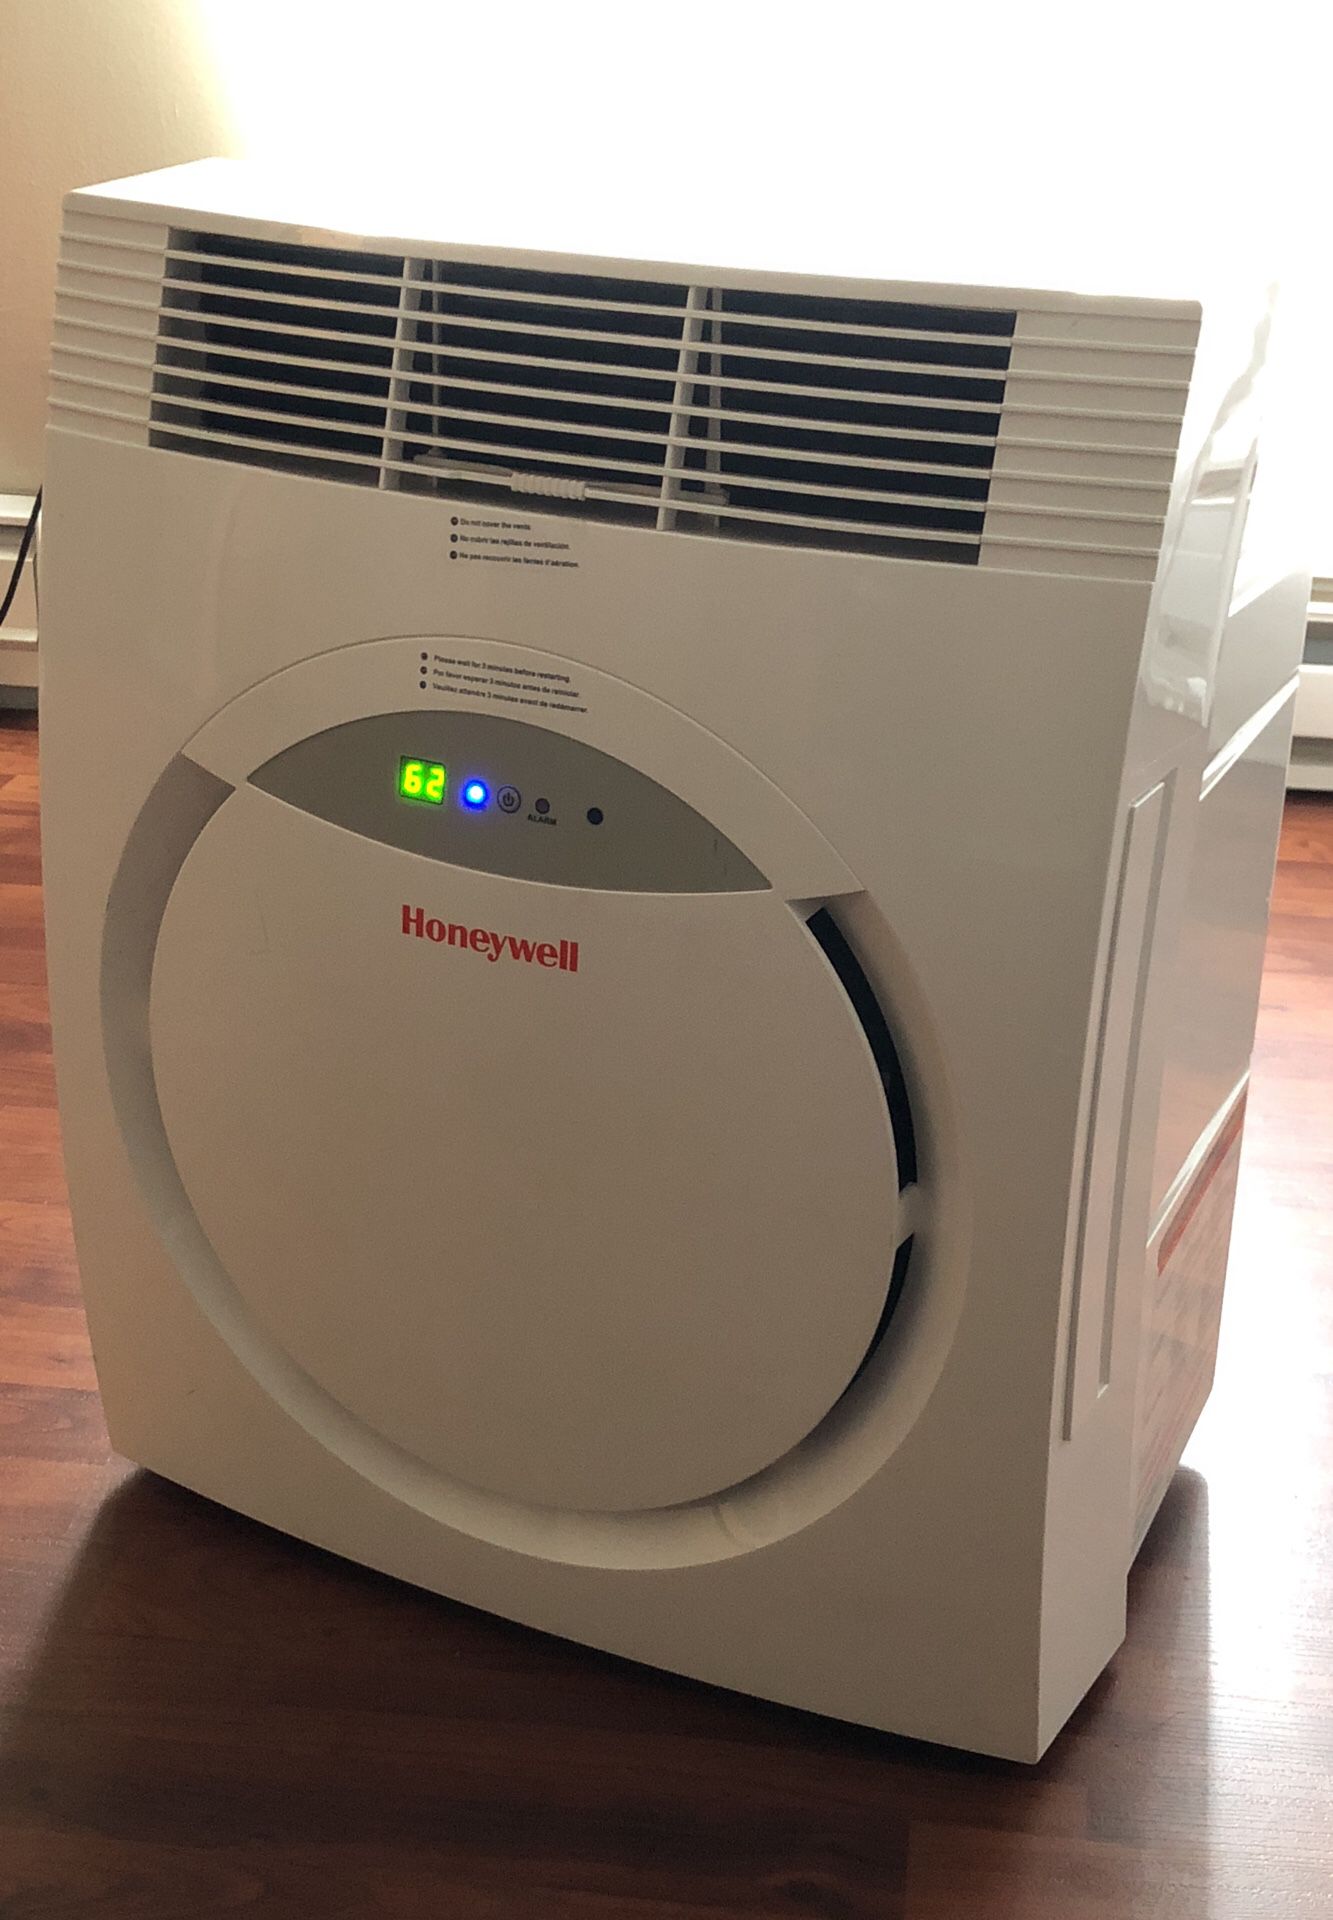 HONEYWELL AIR CONDITIONER FOR SALE